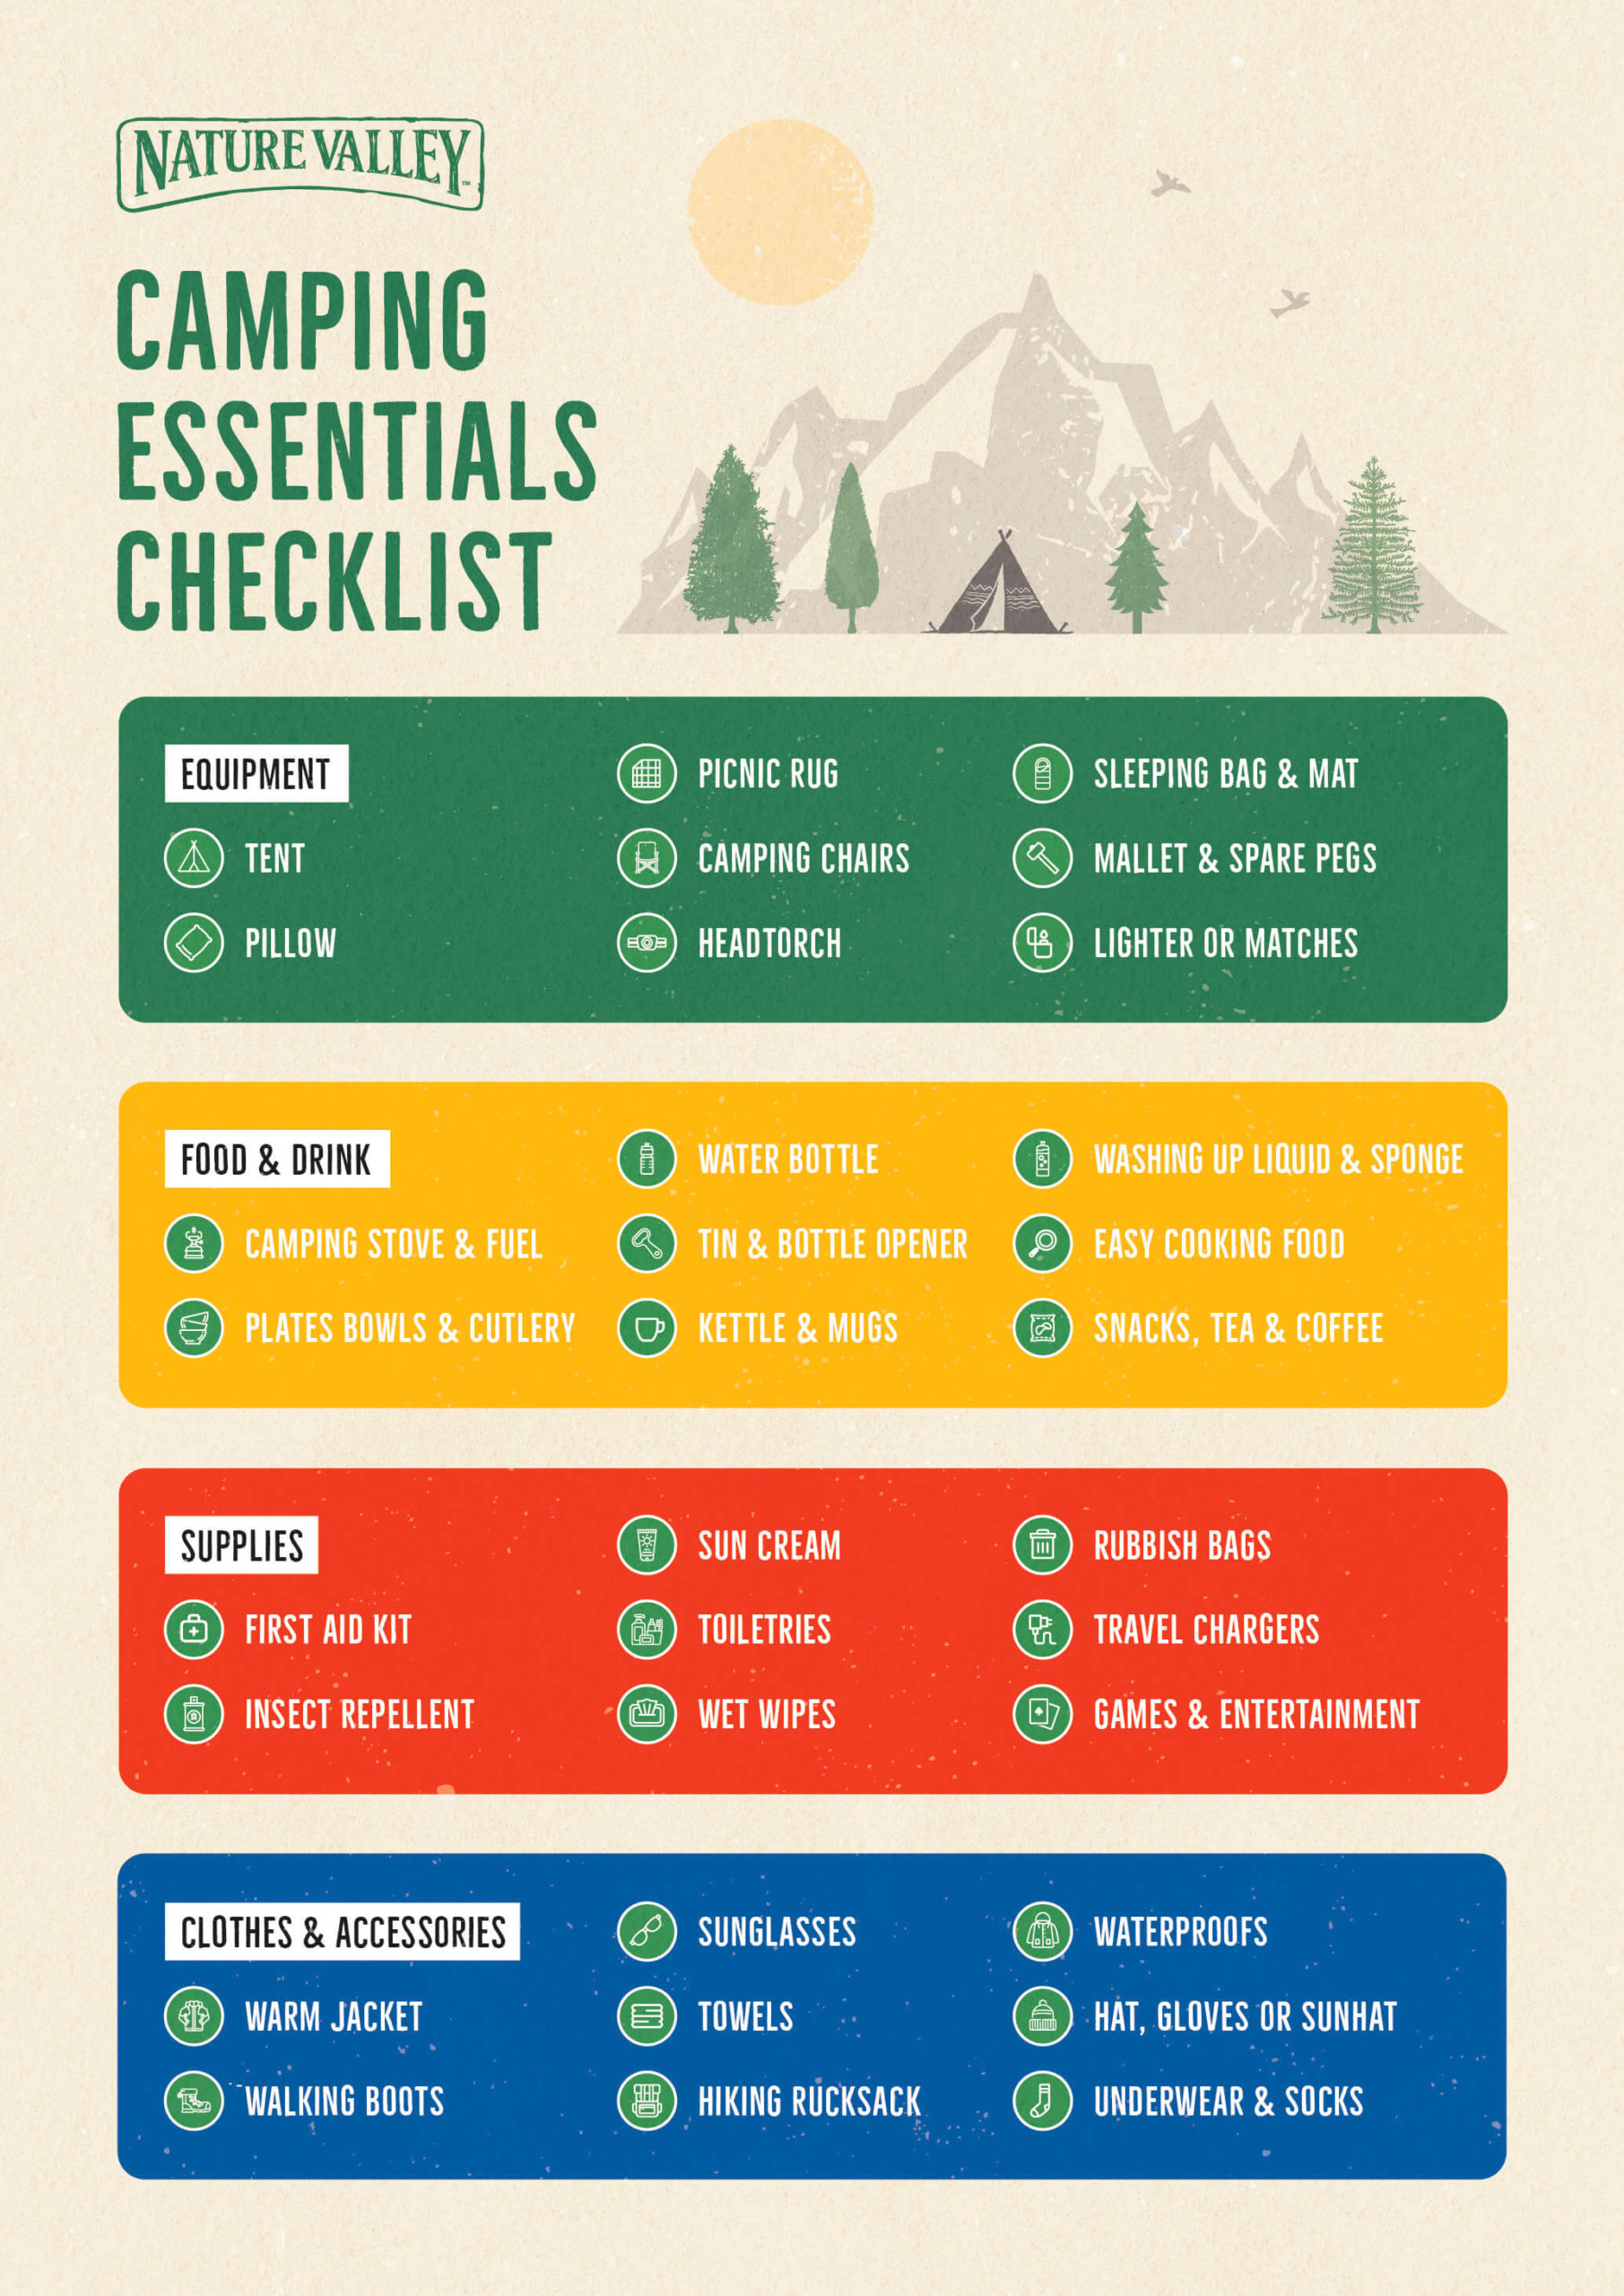 https://www.naturevalley.co.uk/wp-content/uploads/sites/3/2022/06/Nature-Valley-Camping-Essentials-Checklist-scaled.jpg